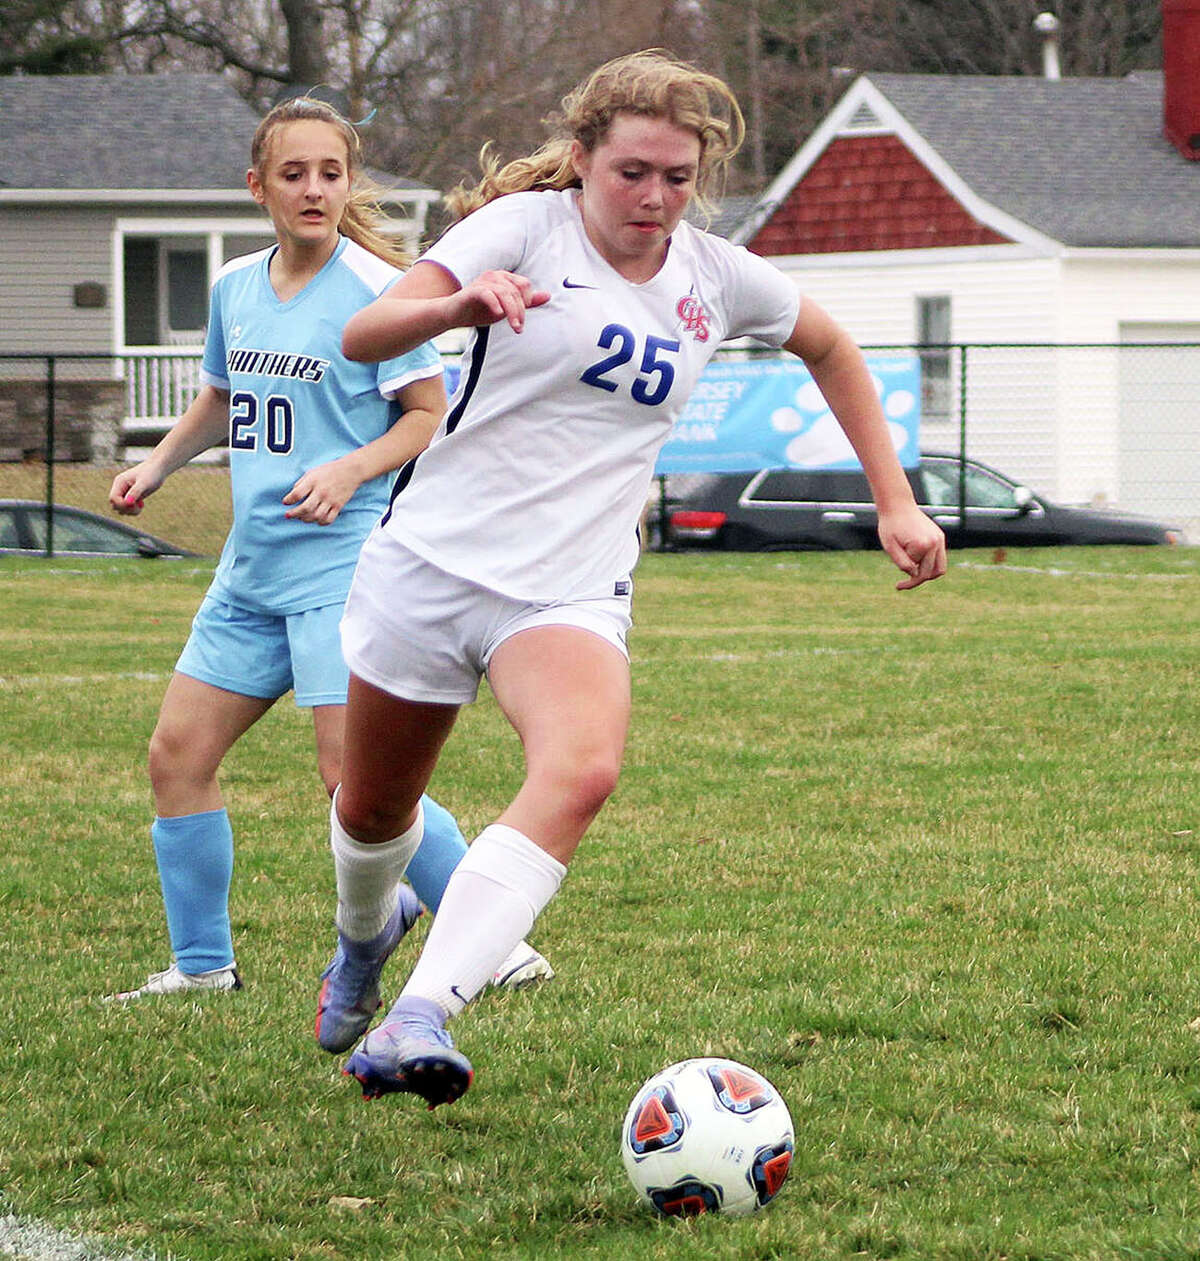 Marlee Whittler has scored 12 goals for the Carlinville Cavaliers this season. She and her teammates will open the Class 1A playoffs May 10 against SCC rival Hillsboro in a semifinal of the Carlinville Regional.